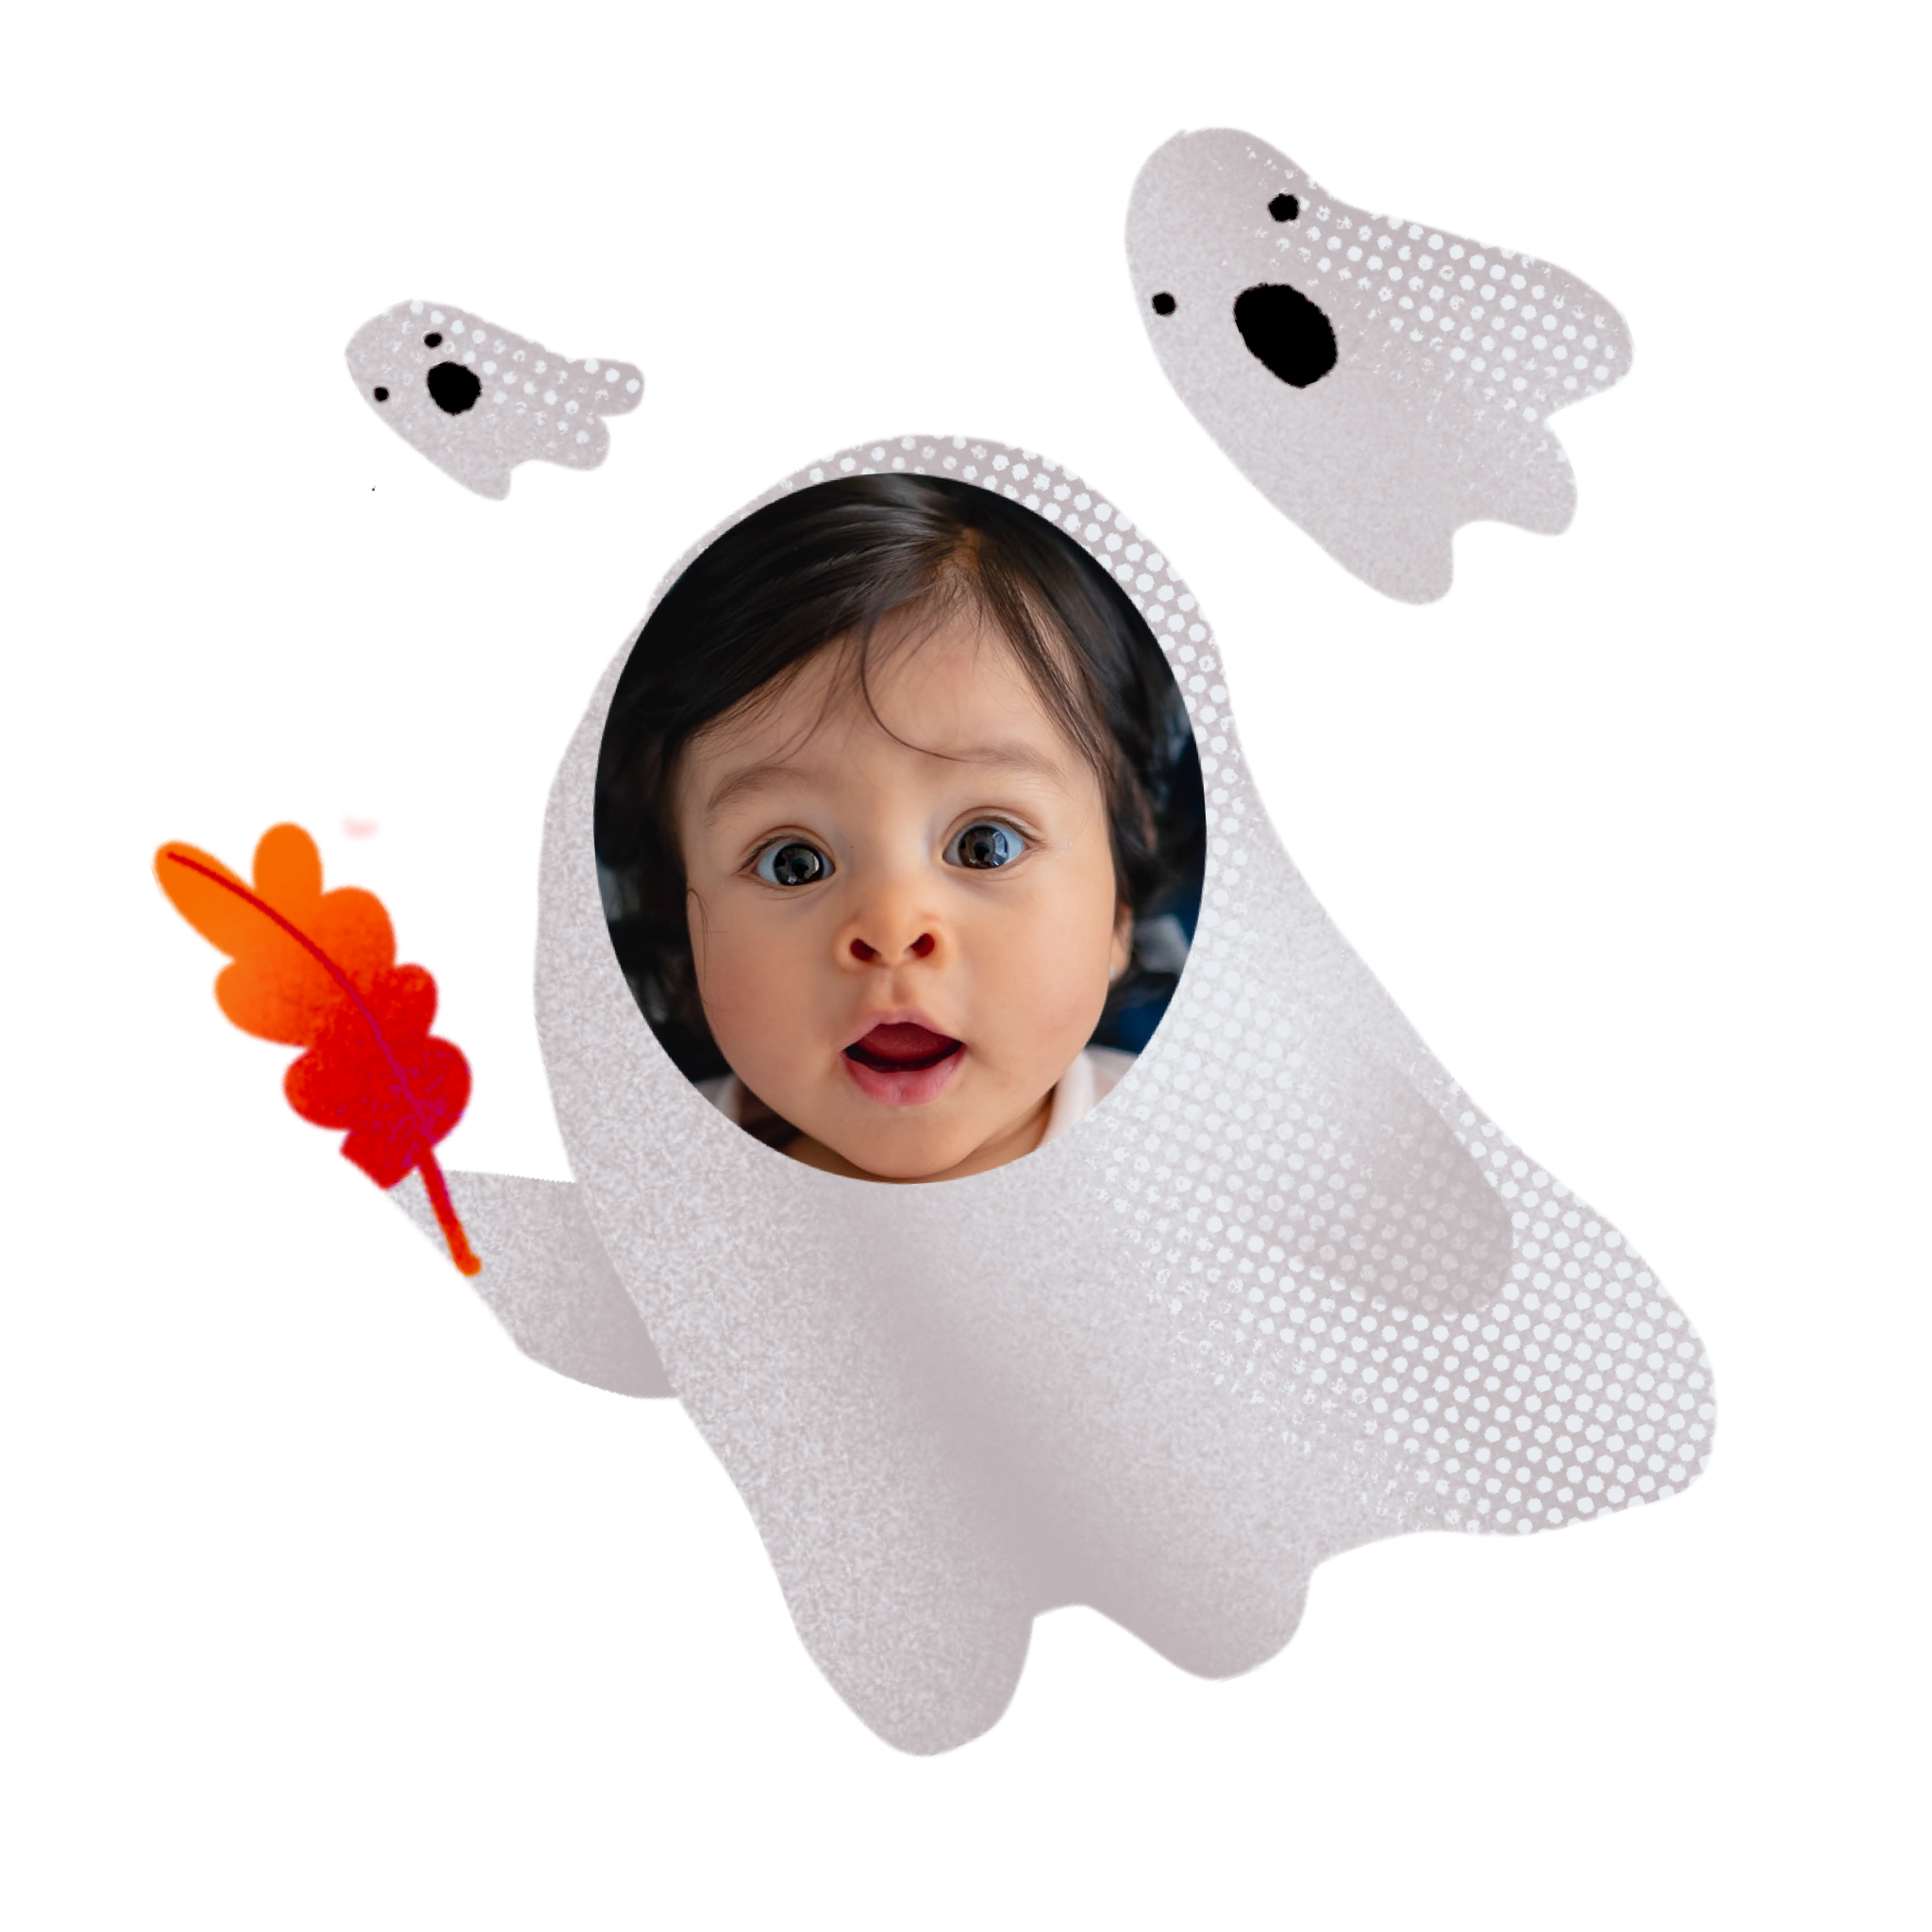 A Little Girl In A Ghost Costume Holding A Flower Halloween Stickers Template